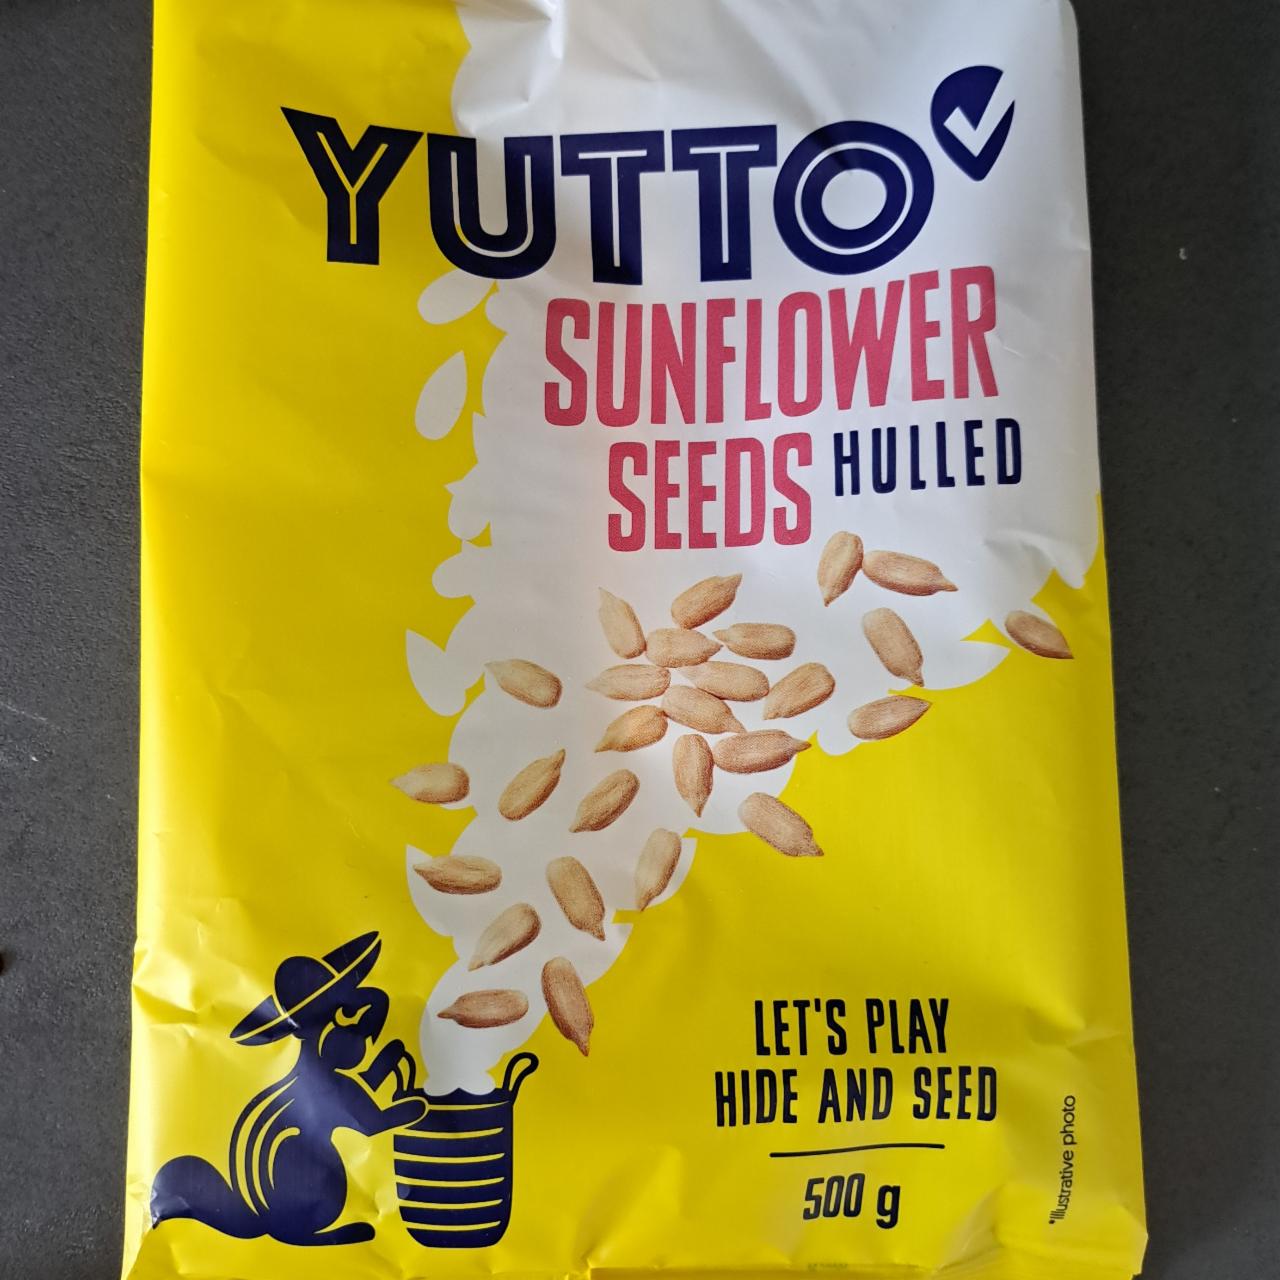 Fotografie - Sunflower seeds hulled Yutto